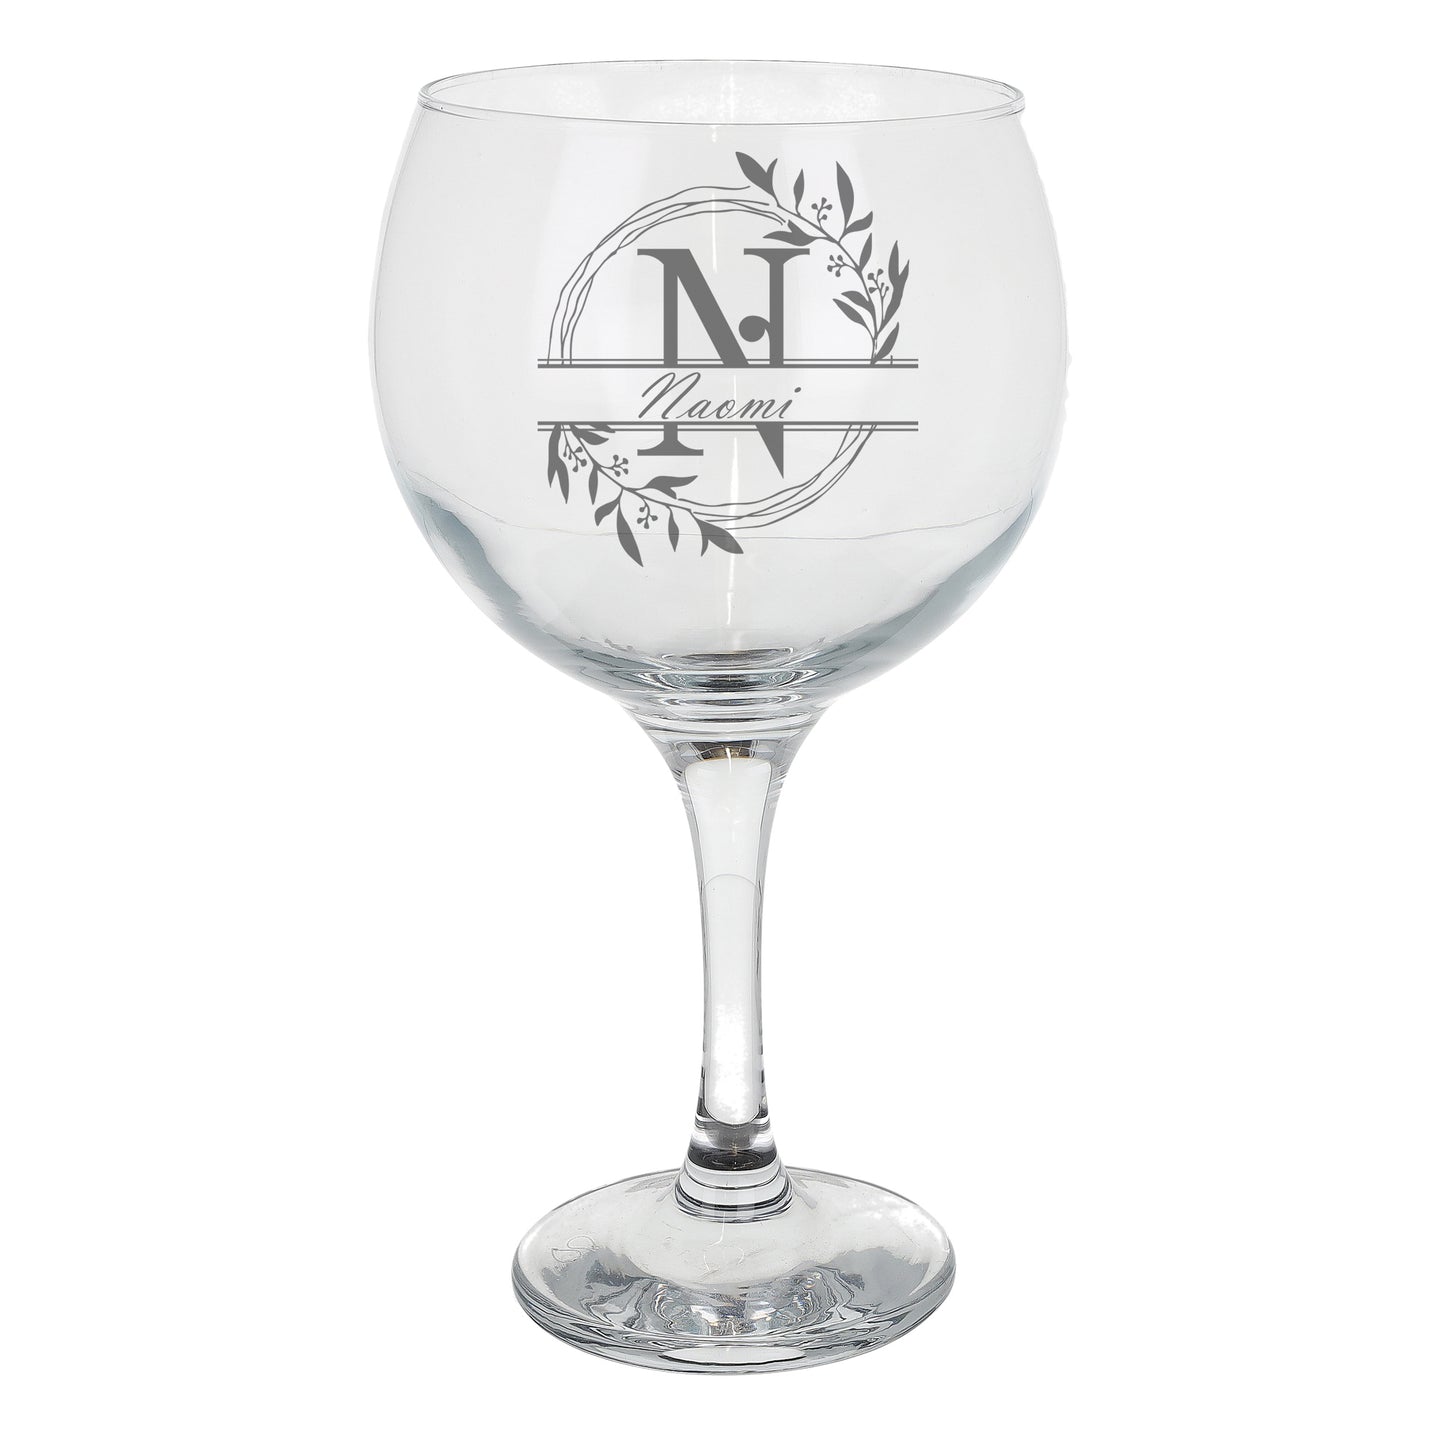 Personalised Engraved Initial Monogram Gin Glass Gift  - Always Looking Good - Engraved Glass  